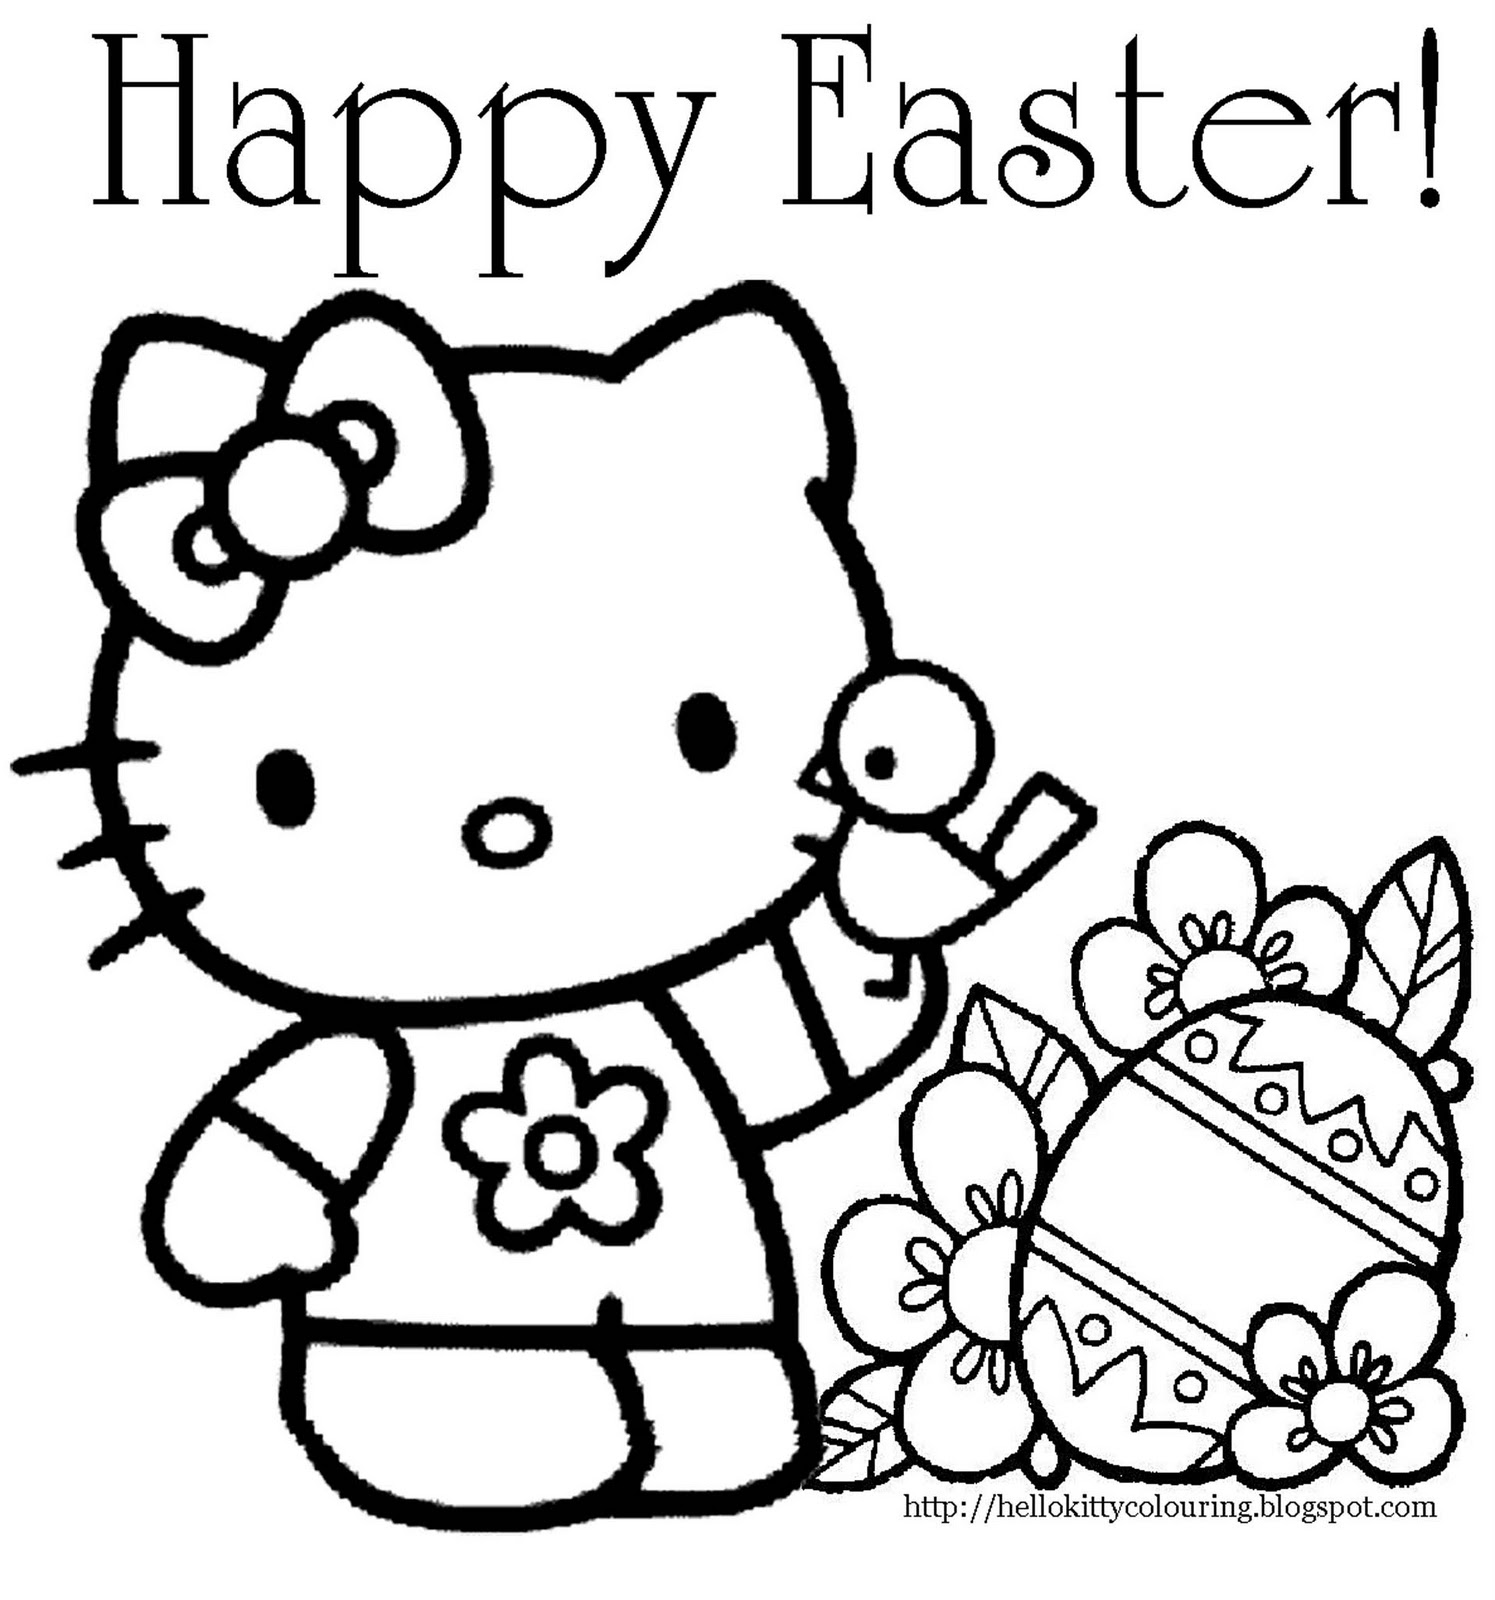 Easter Colouring Pages, Wonderful Easter Colouring Pages, #12855